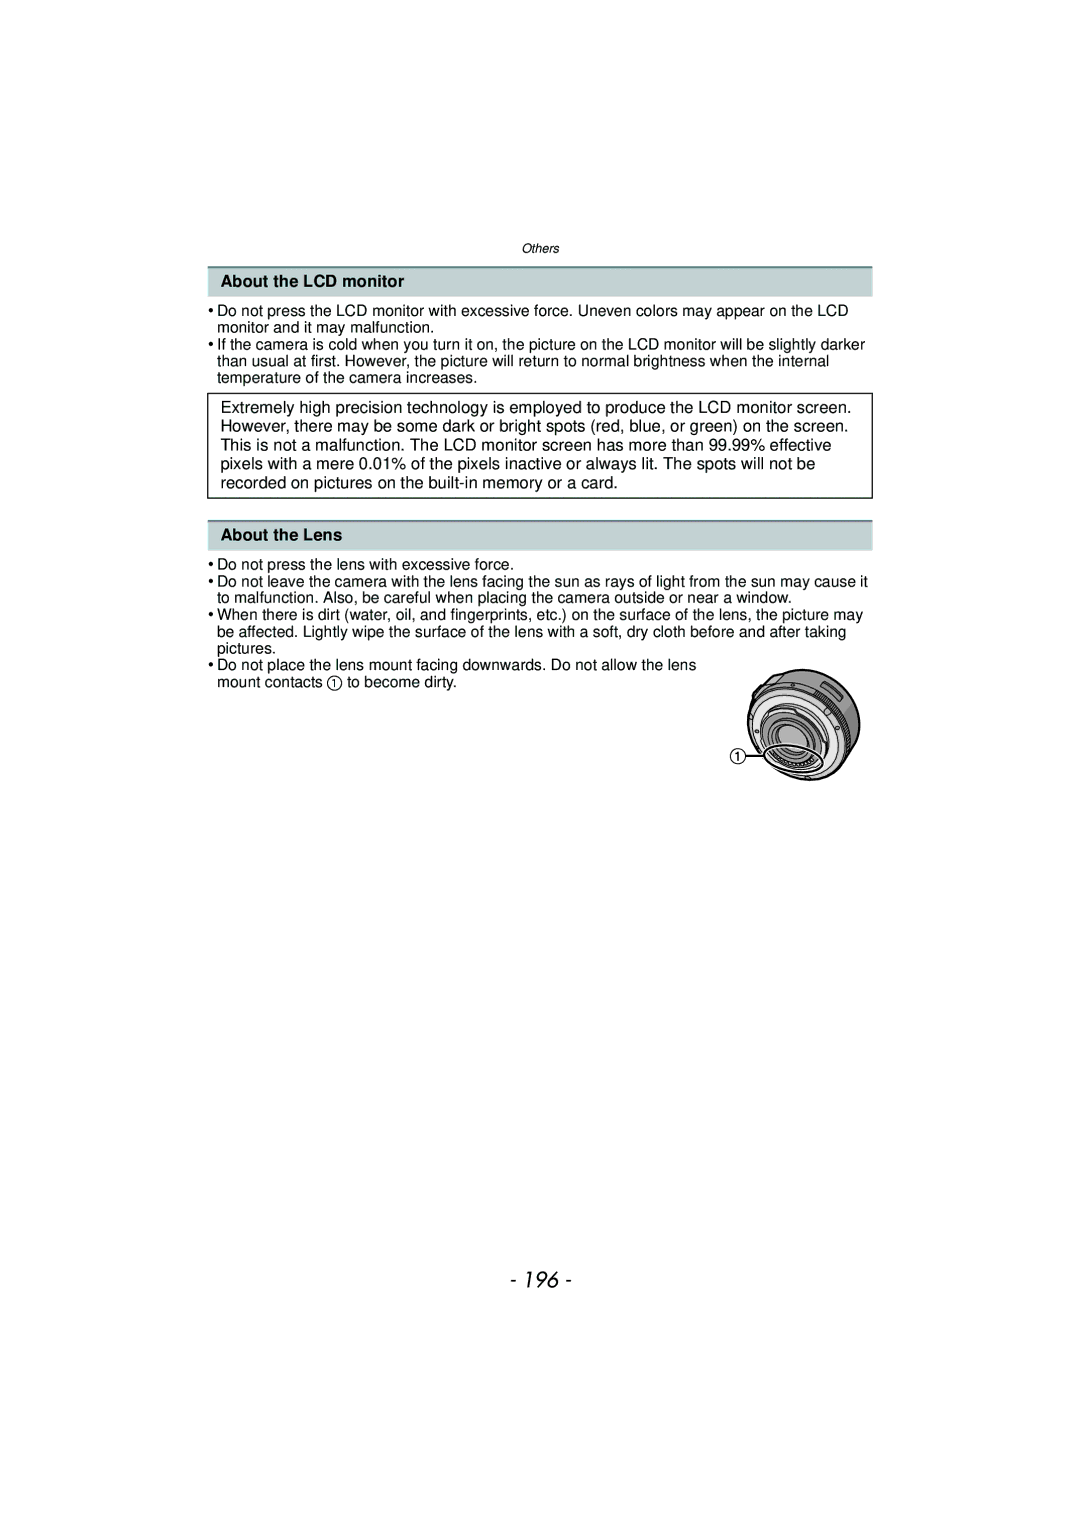 Panasonic DMC-GF5 owner manual 196, About the LCD monitor, About the Lens 